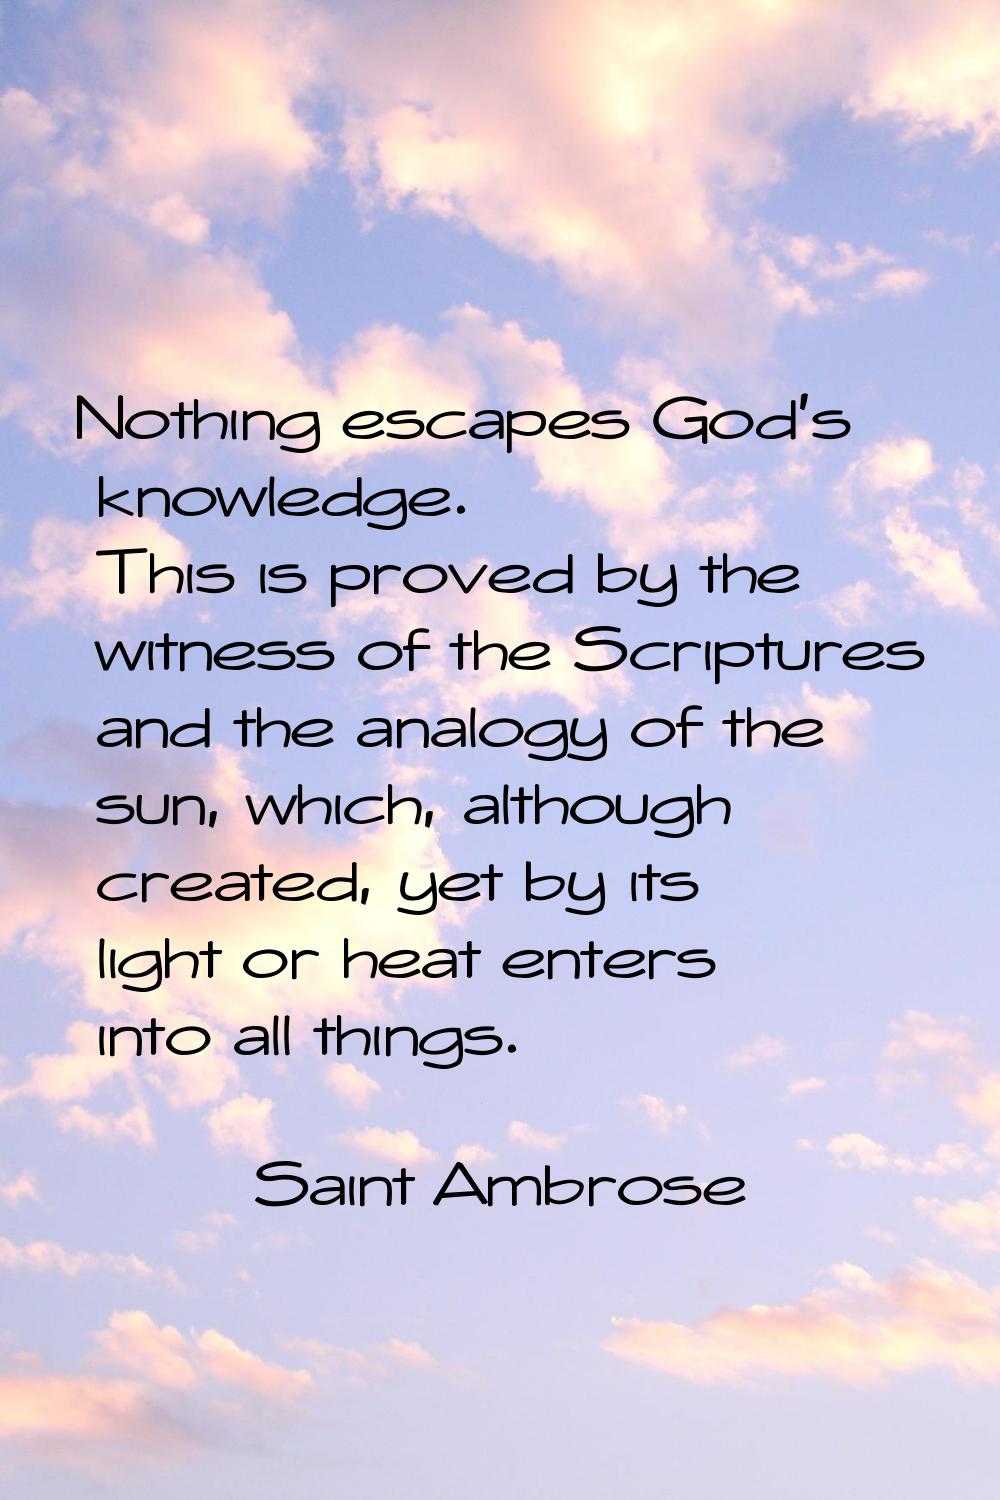 Nothing escapes God's knowledge. This is proved by the witness of the Scriptures and the analogy of